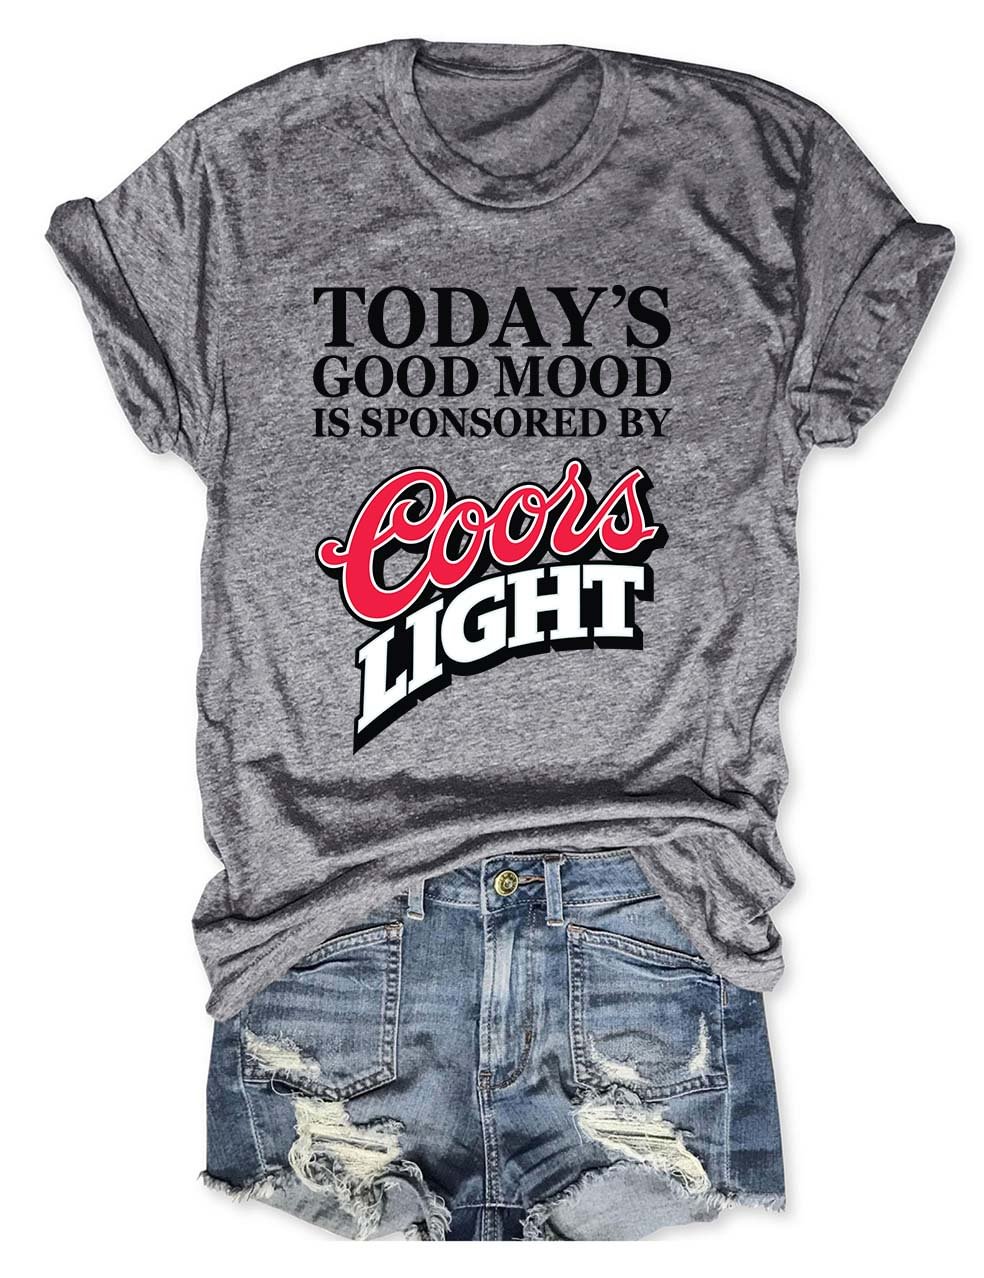 Today's Good Mood Is Sponsored By Coors Light T-Shirt